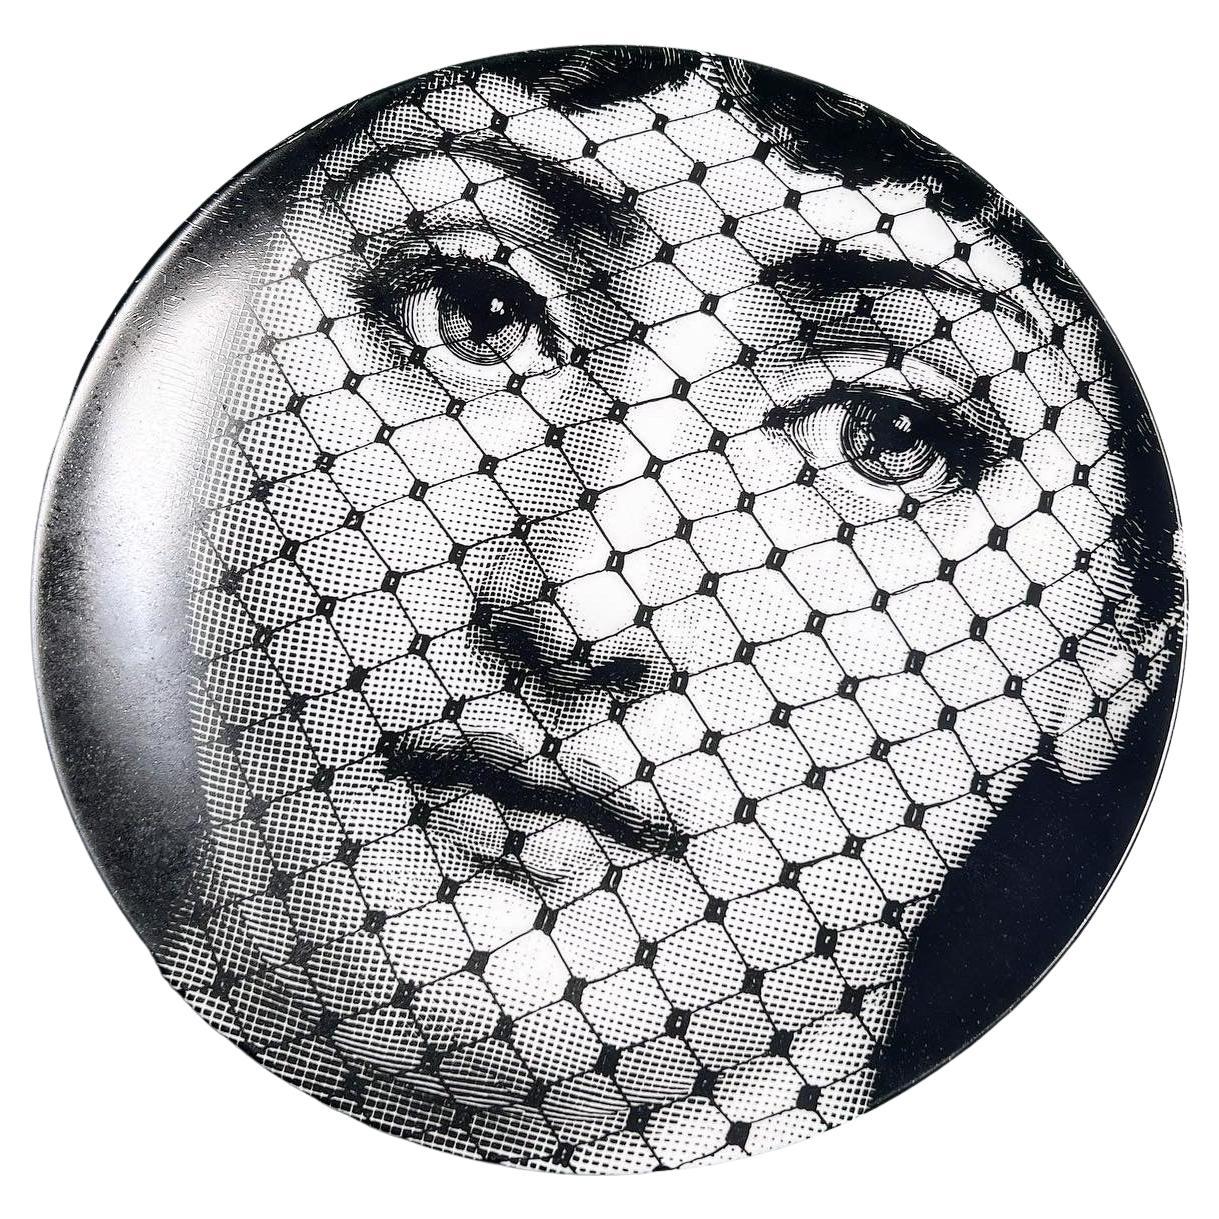 Where are Fornasetti plates made?